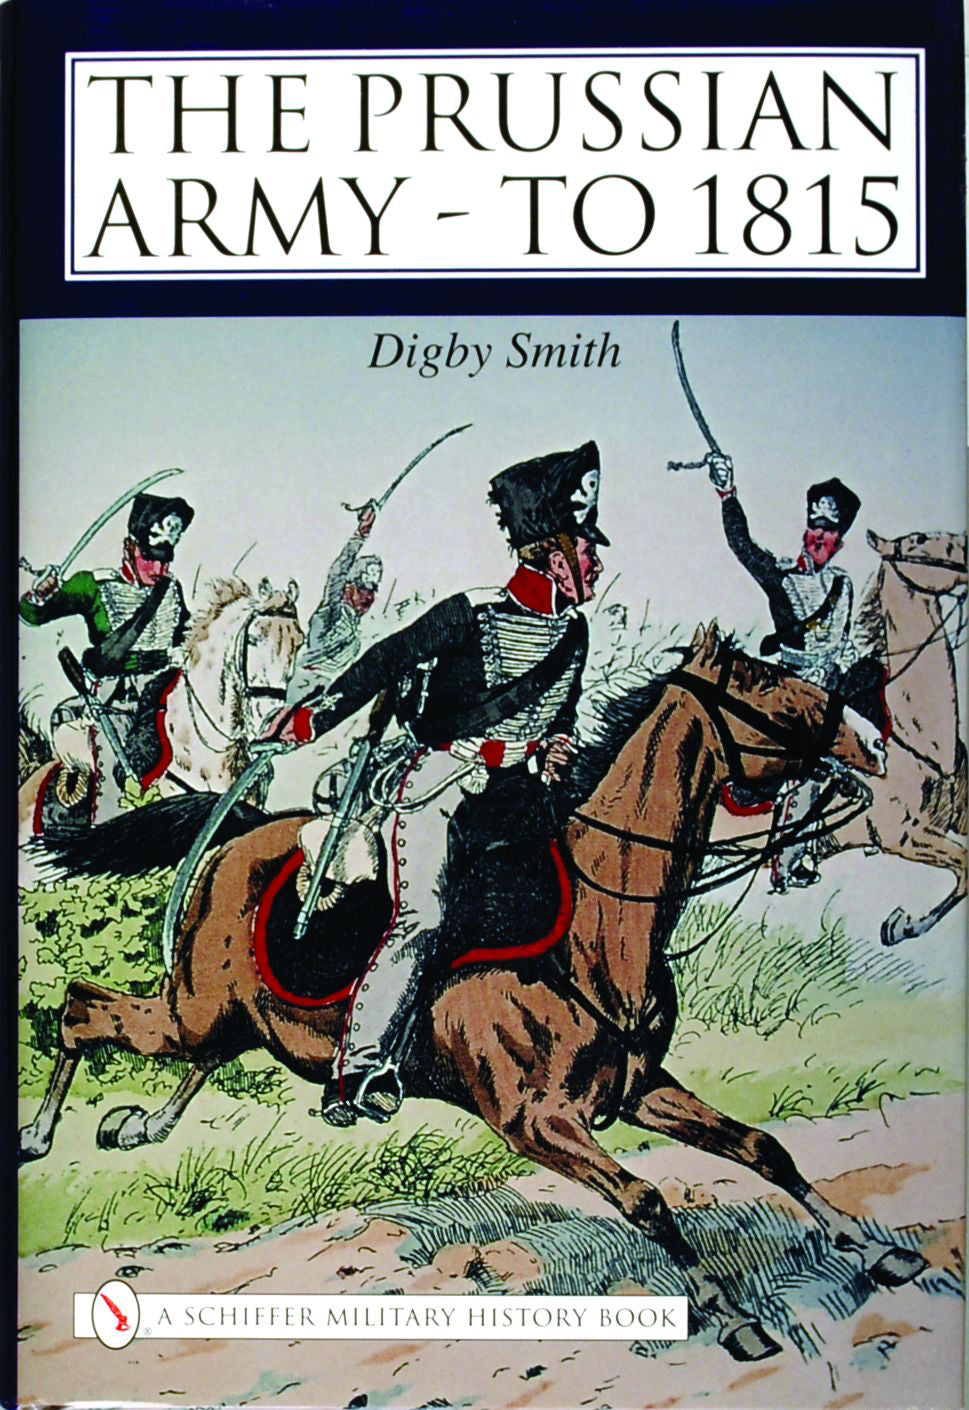 The Prussian Army - to 1815